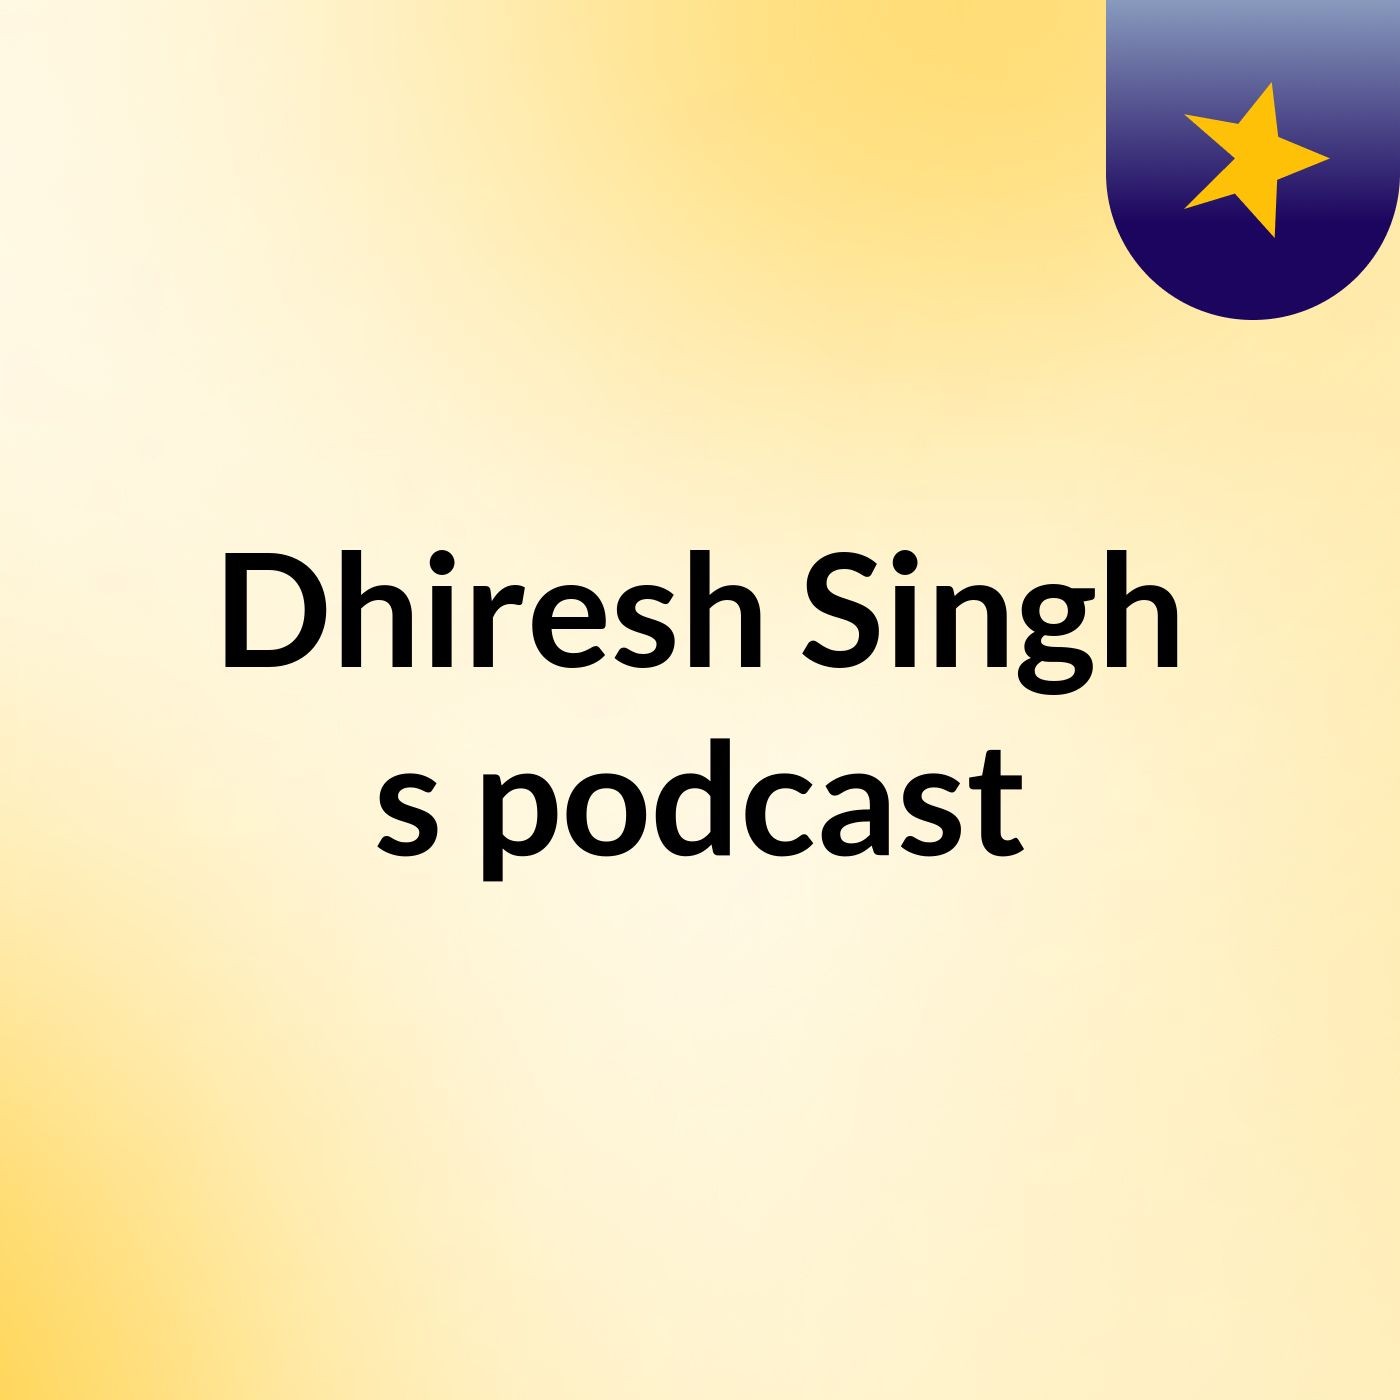 Episode 5 - Dhiresh Singh's podcast